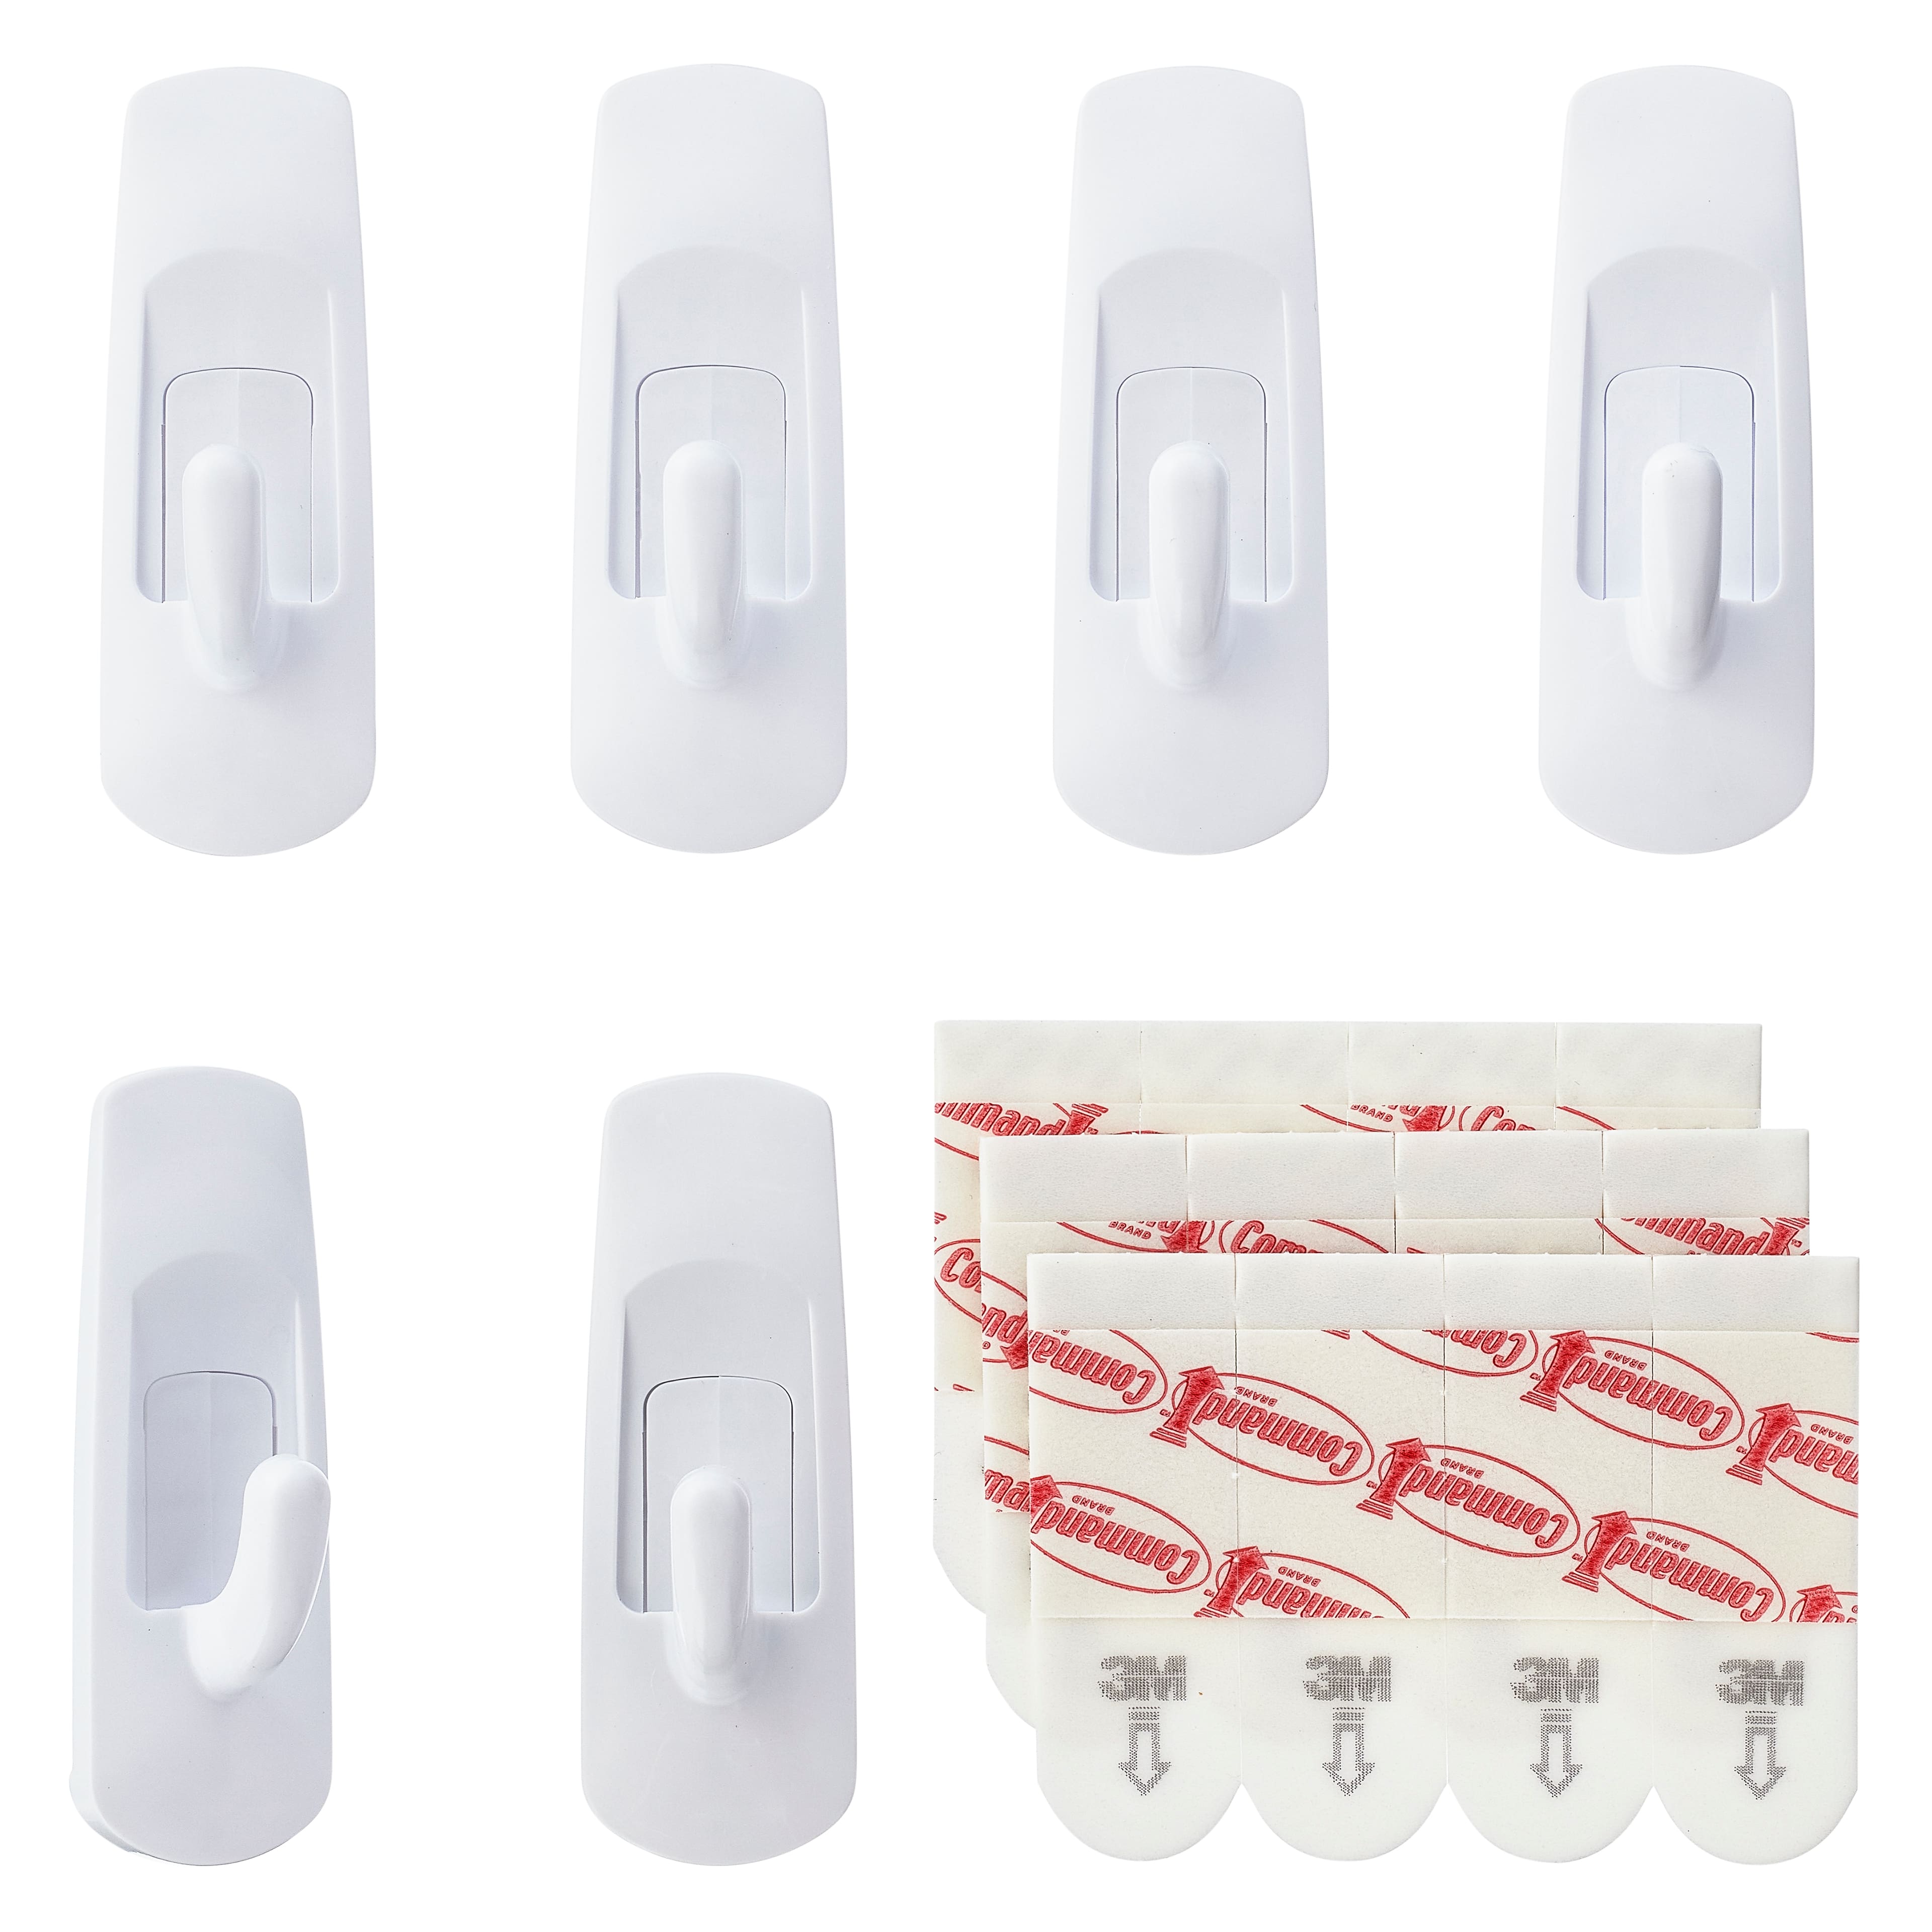 12 Packs: 6 ct. (72 total) Command&#x2122; Small White Utility Hooks